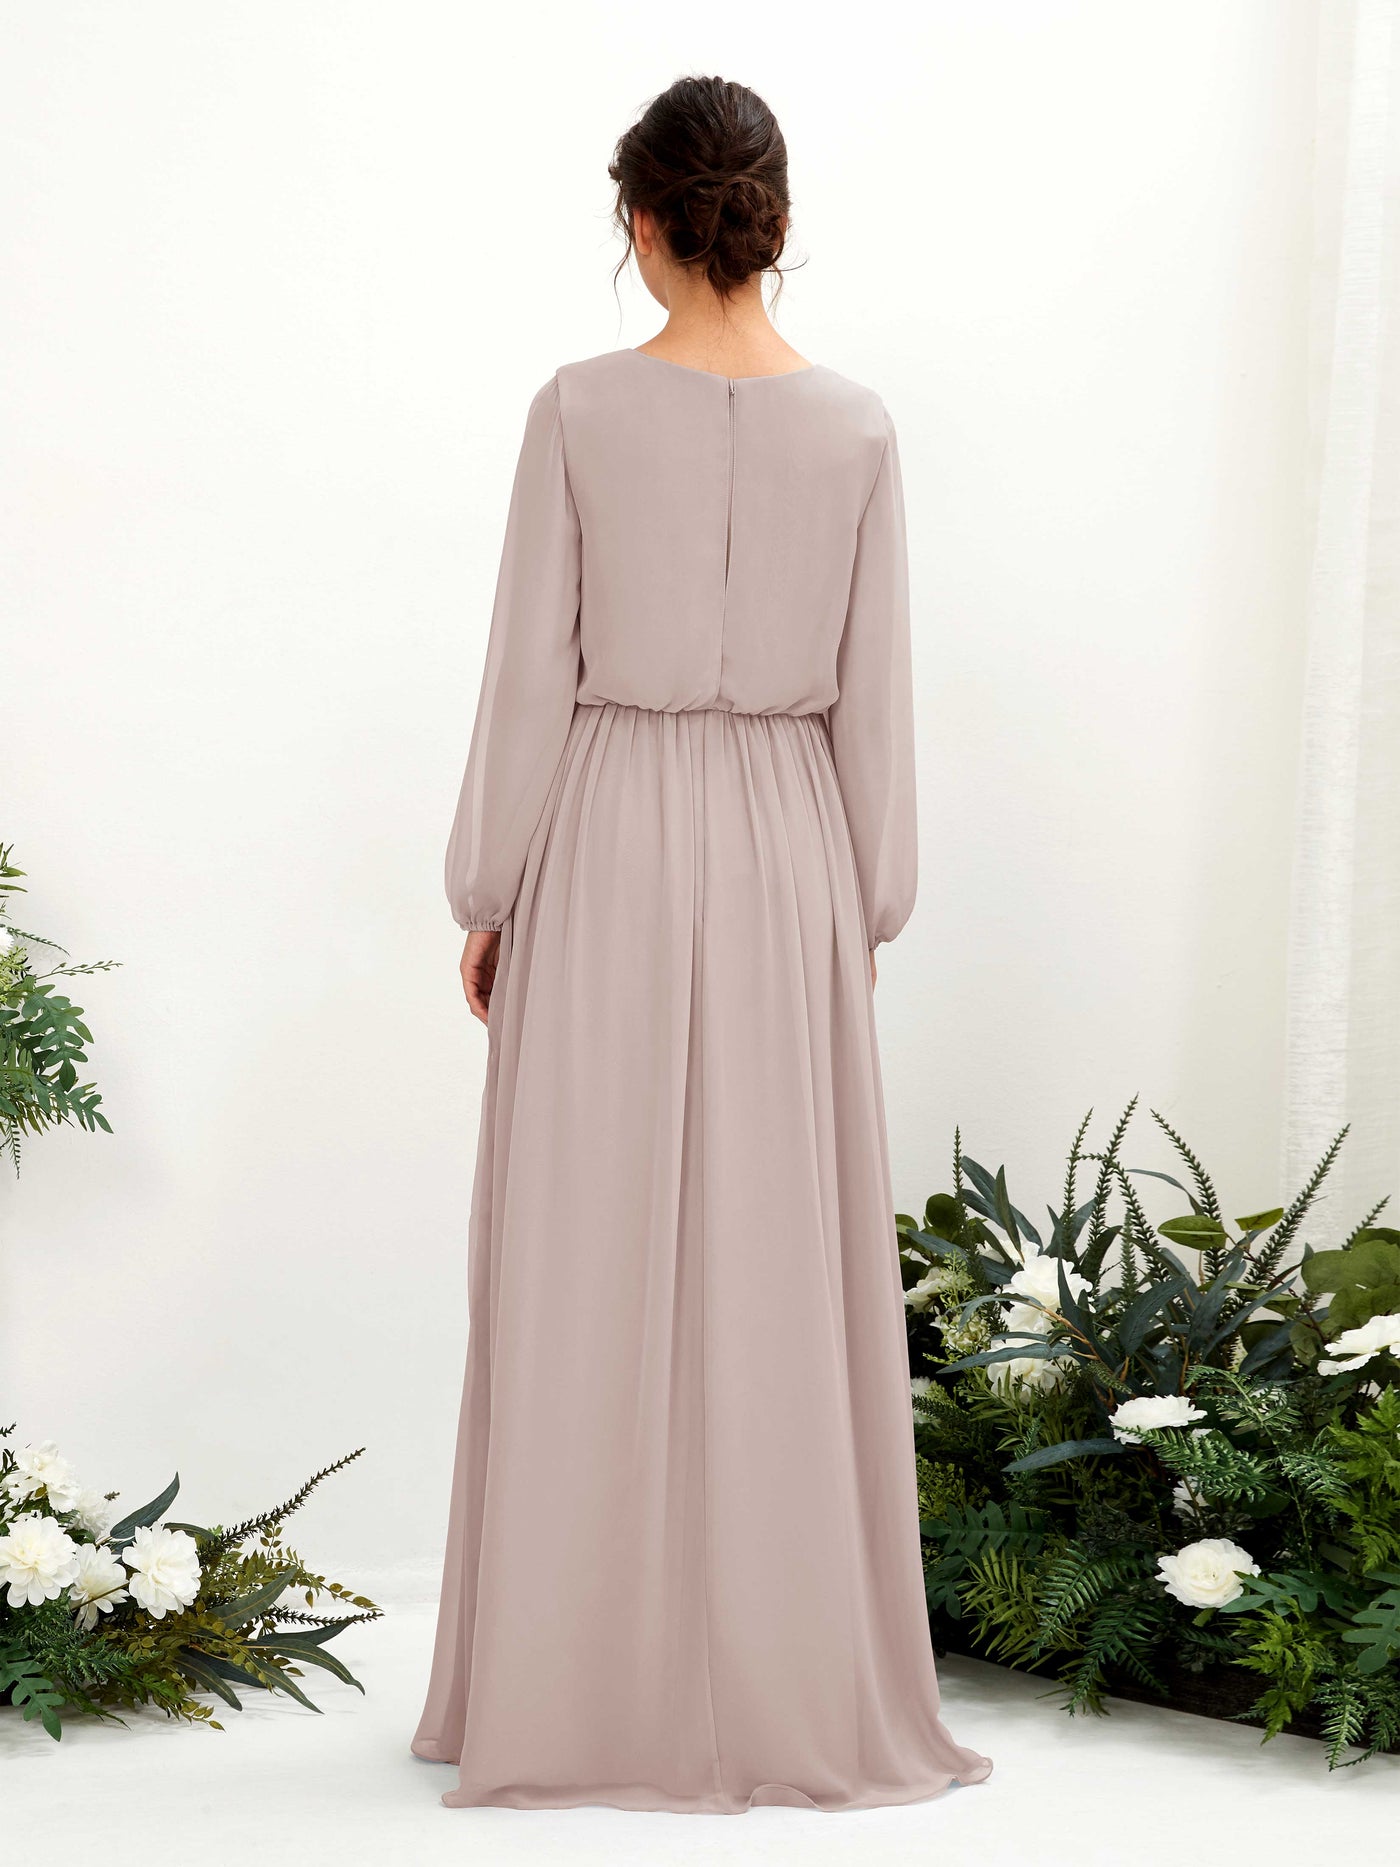 Taupe Bridesmaid Dresses Bridesmaid Dress A-line Chiffon V-neck Full Length Long Sleeves Wedding Party Dress (81223824)#color_taupe